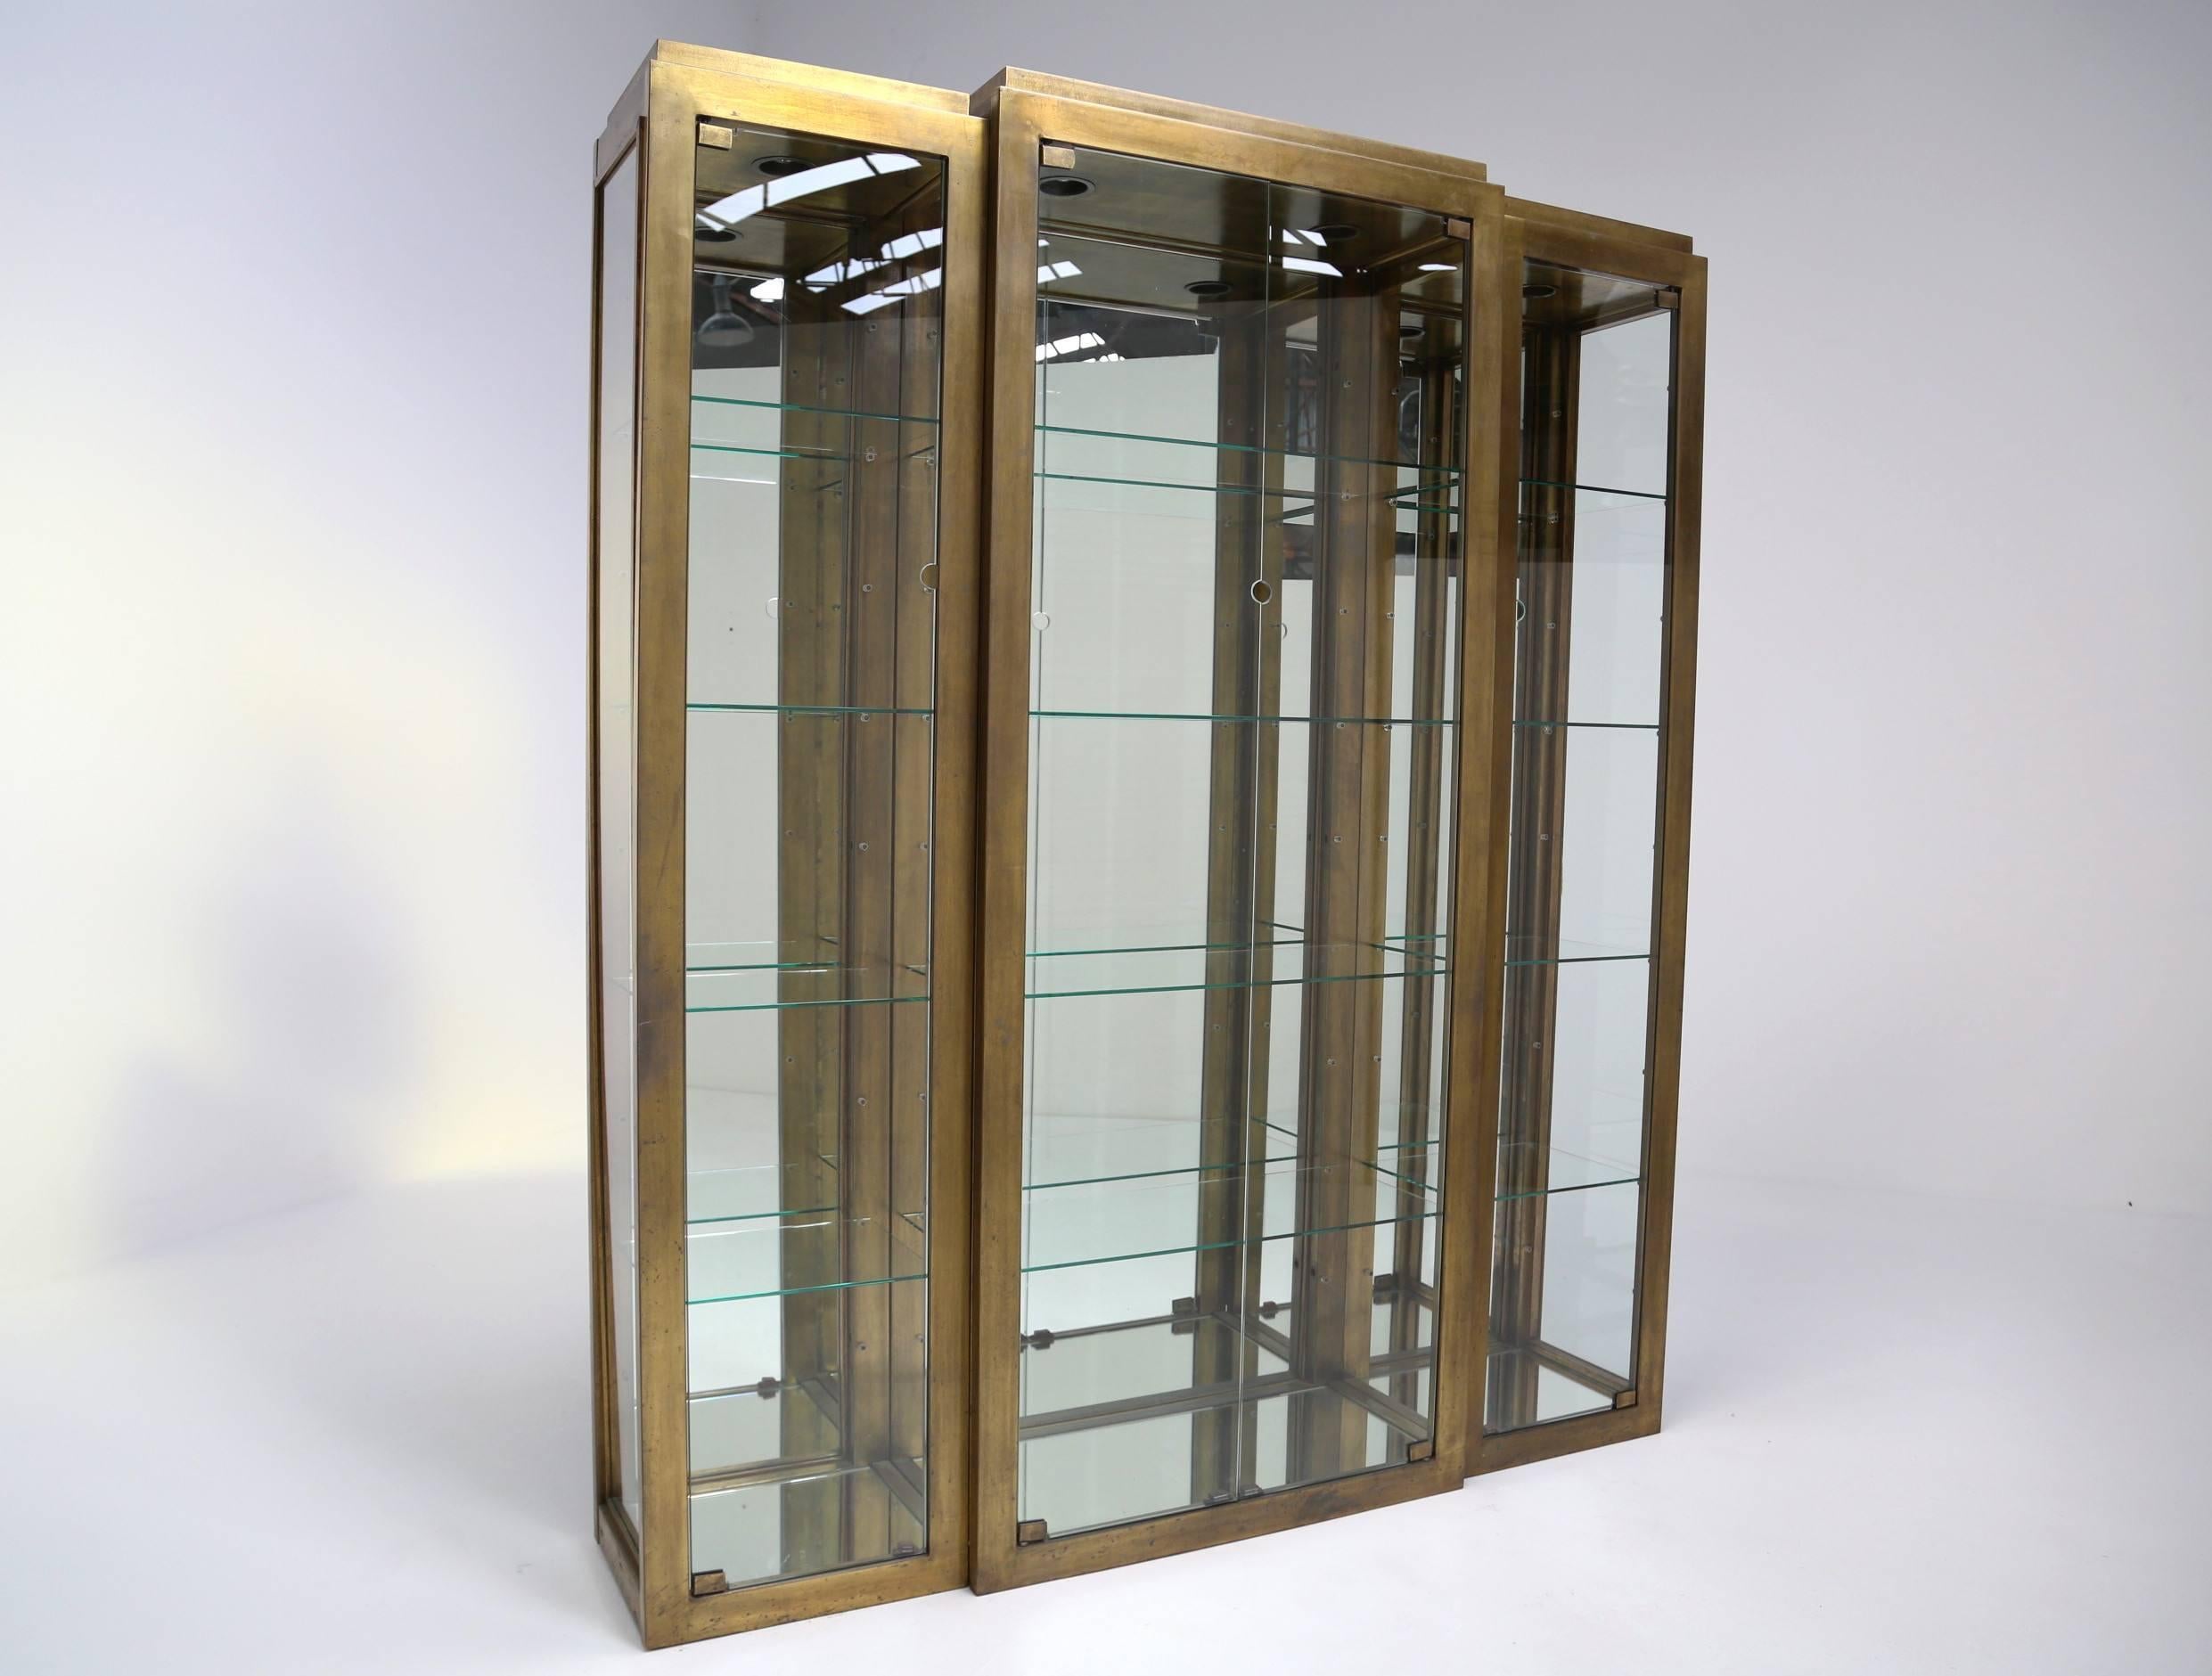 A plated brass Art Deco style four-door display cabinet with internal lighting. Two narrow side cabinets attach to a larger central cabinet to form a large stepped Art Deco style vitrine. In beautiful original condition and a spectacular piece for